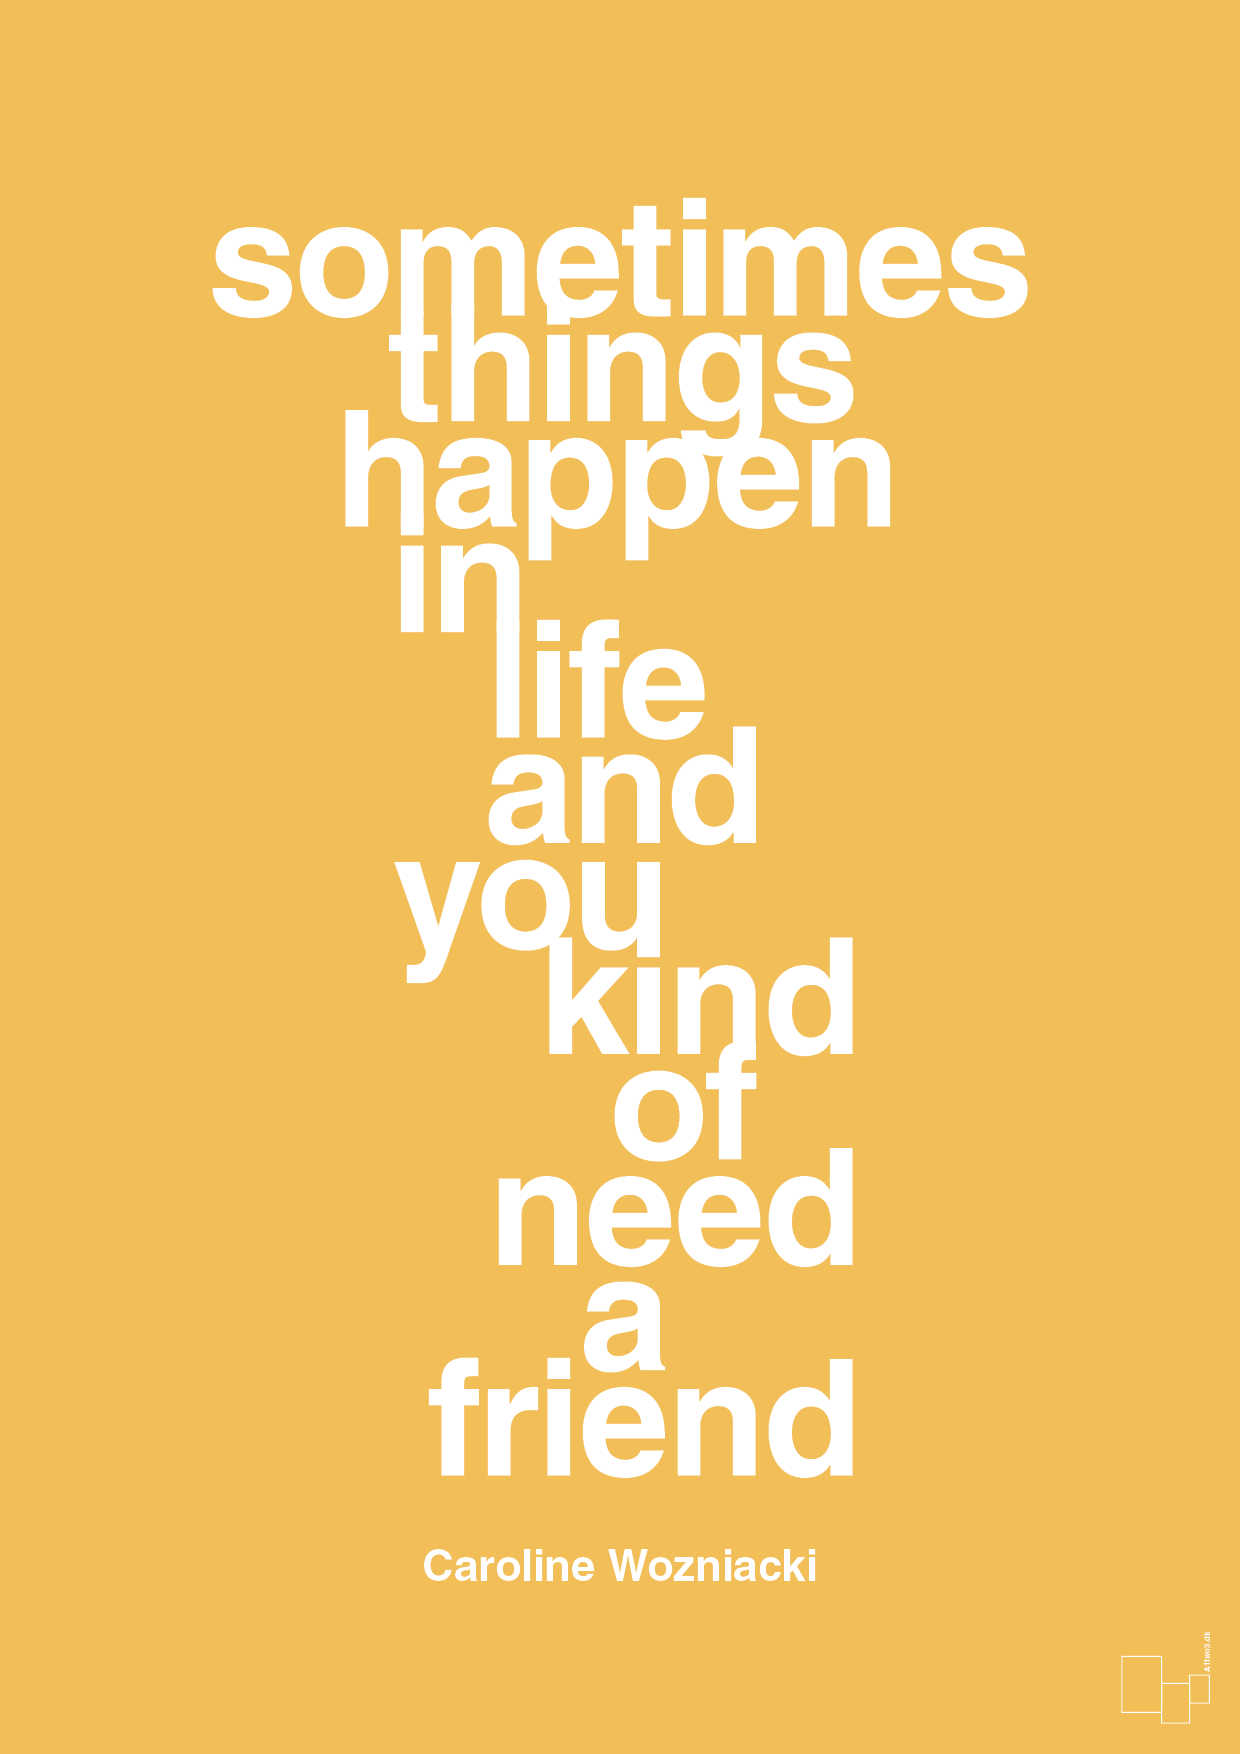 sometimes things happen in life and you kind of need a friend - Plakat med Citater i Honeycomb